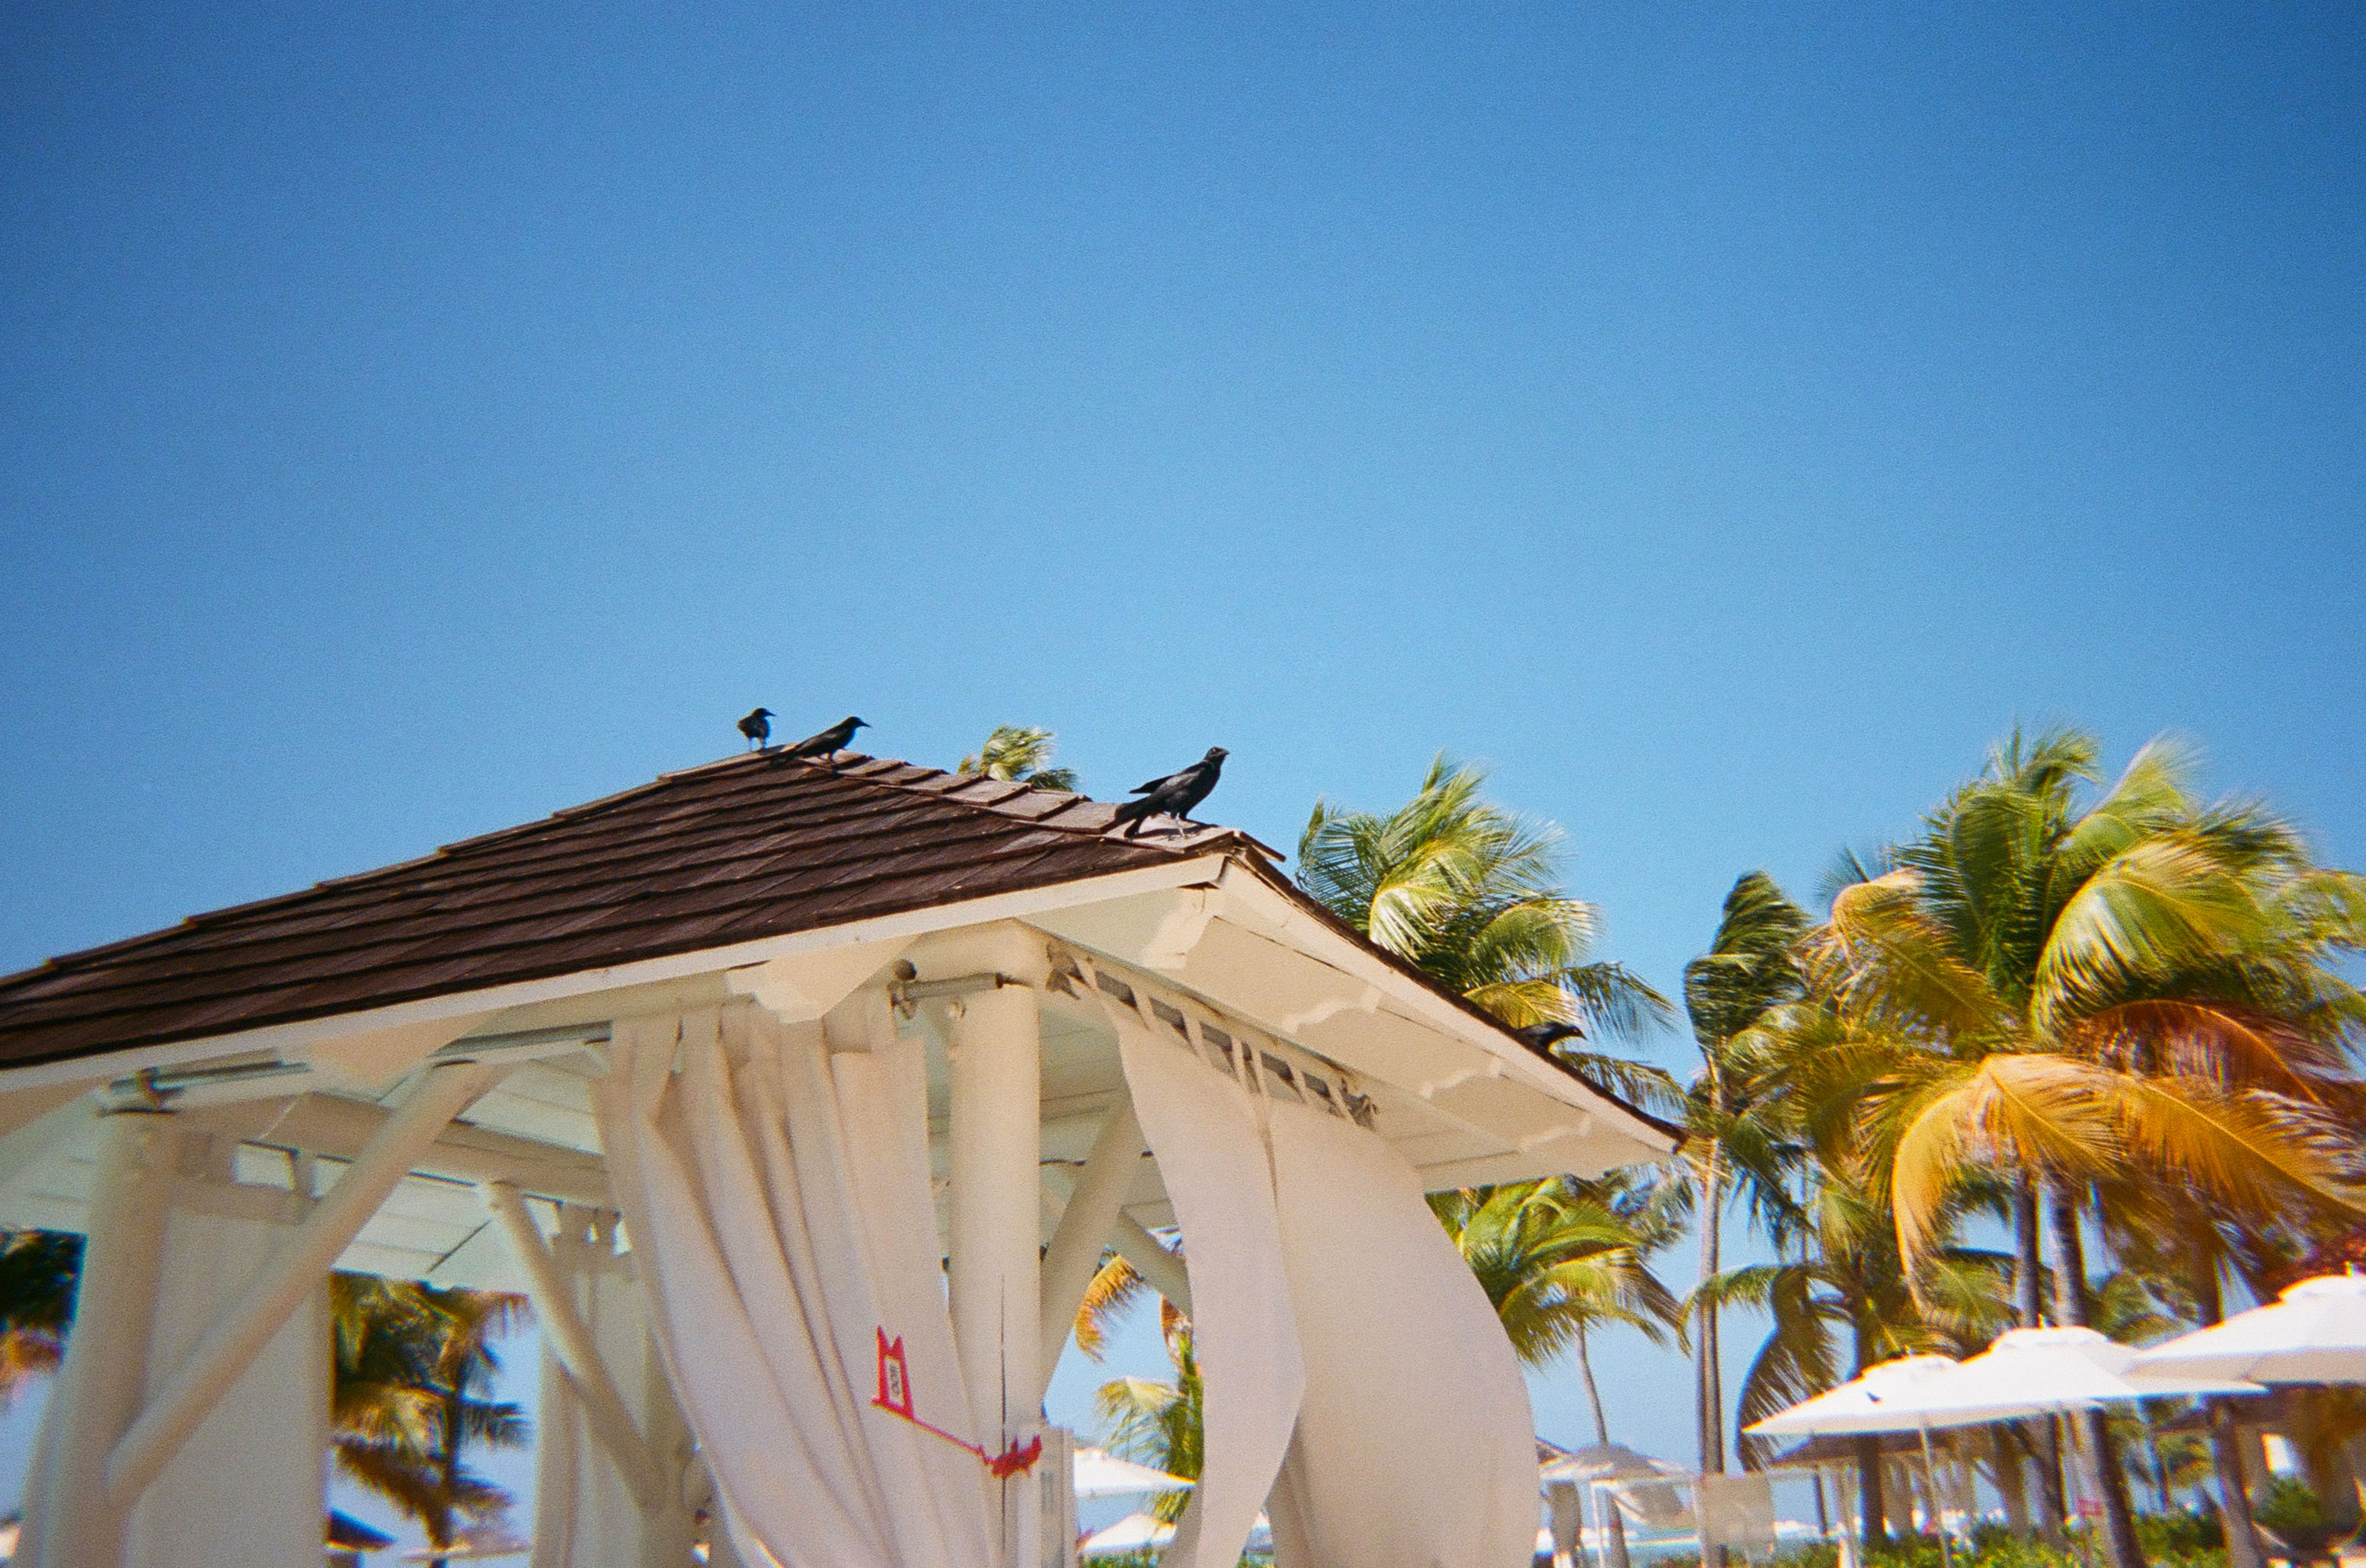 three black grackles standing on the roof of a cabana